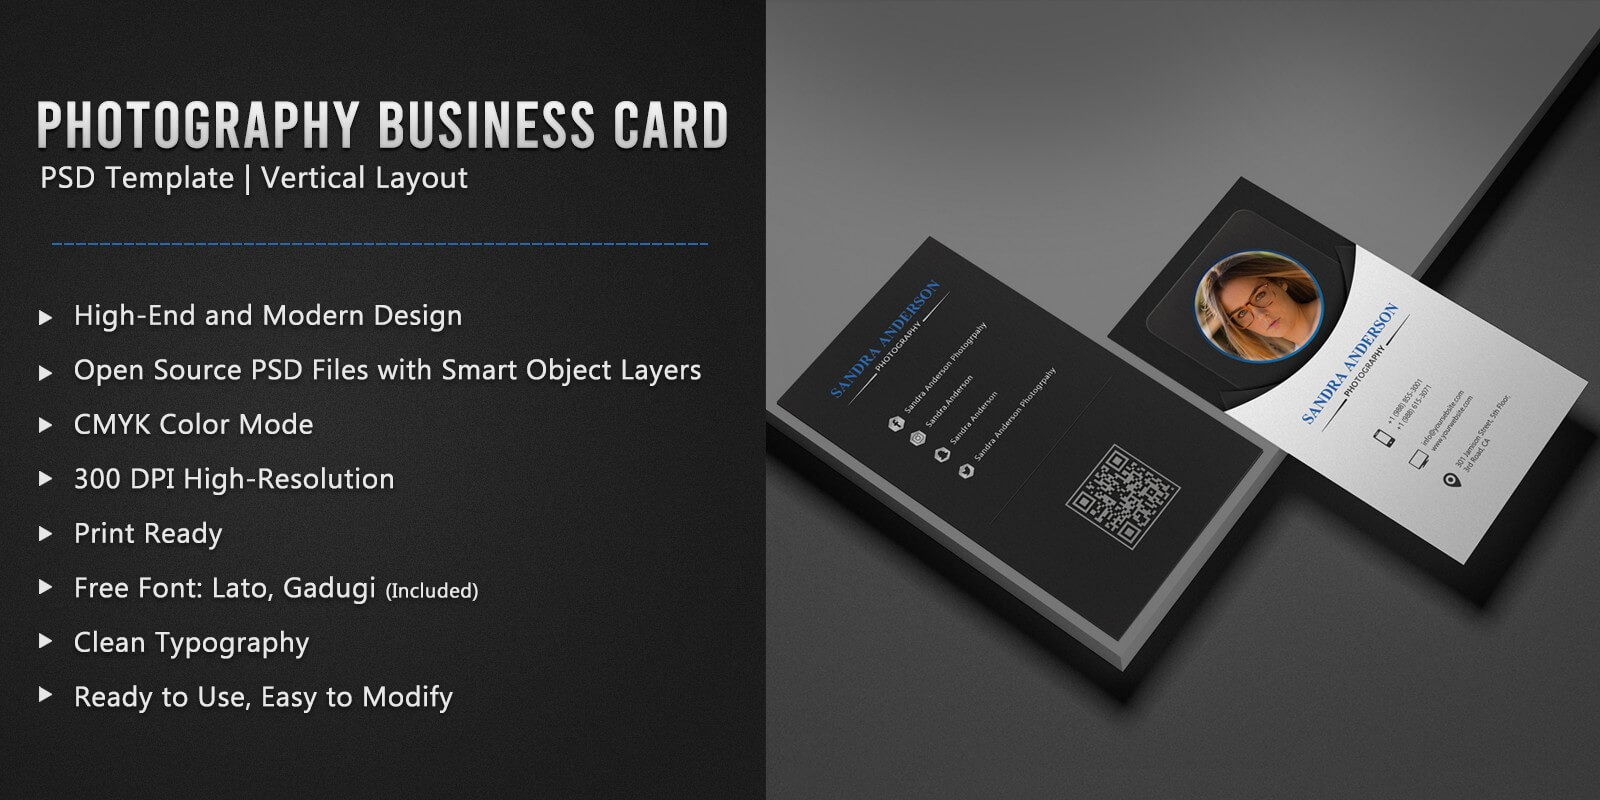 035 Free Photography Business Card Templates Photoshop Inside Photography Business Card Template Photoshop